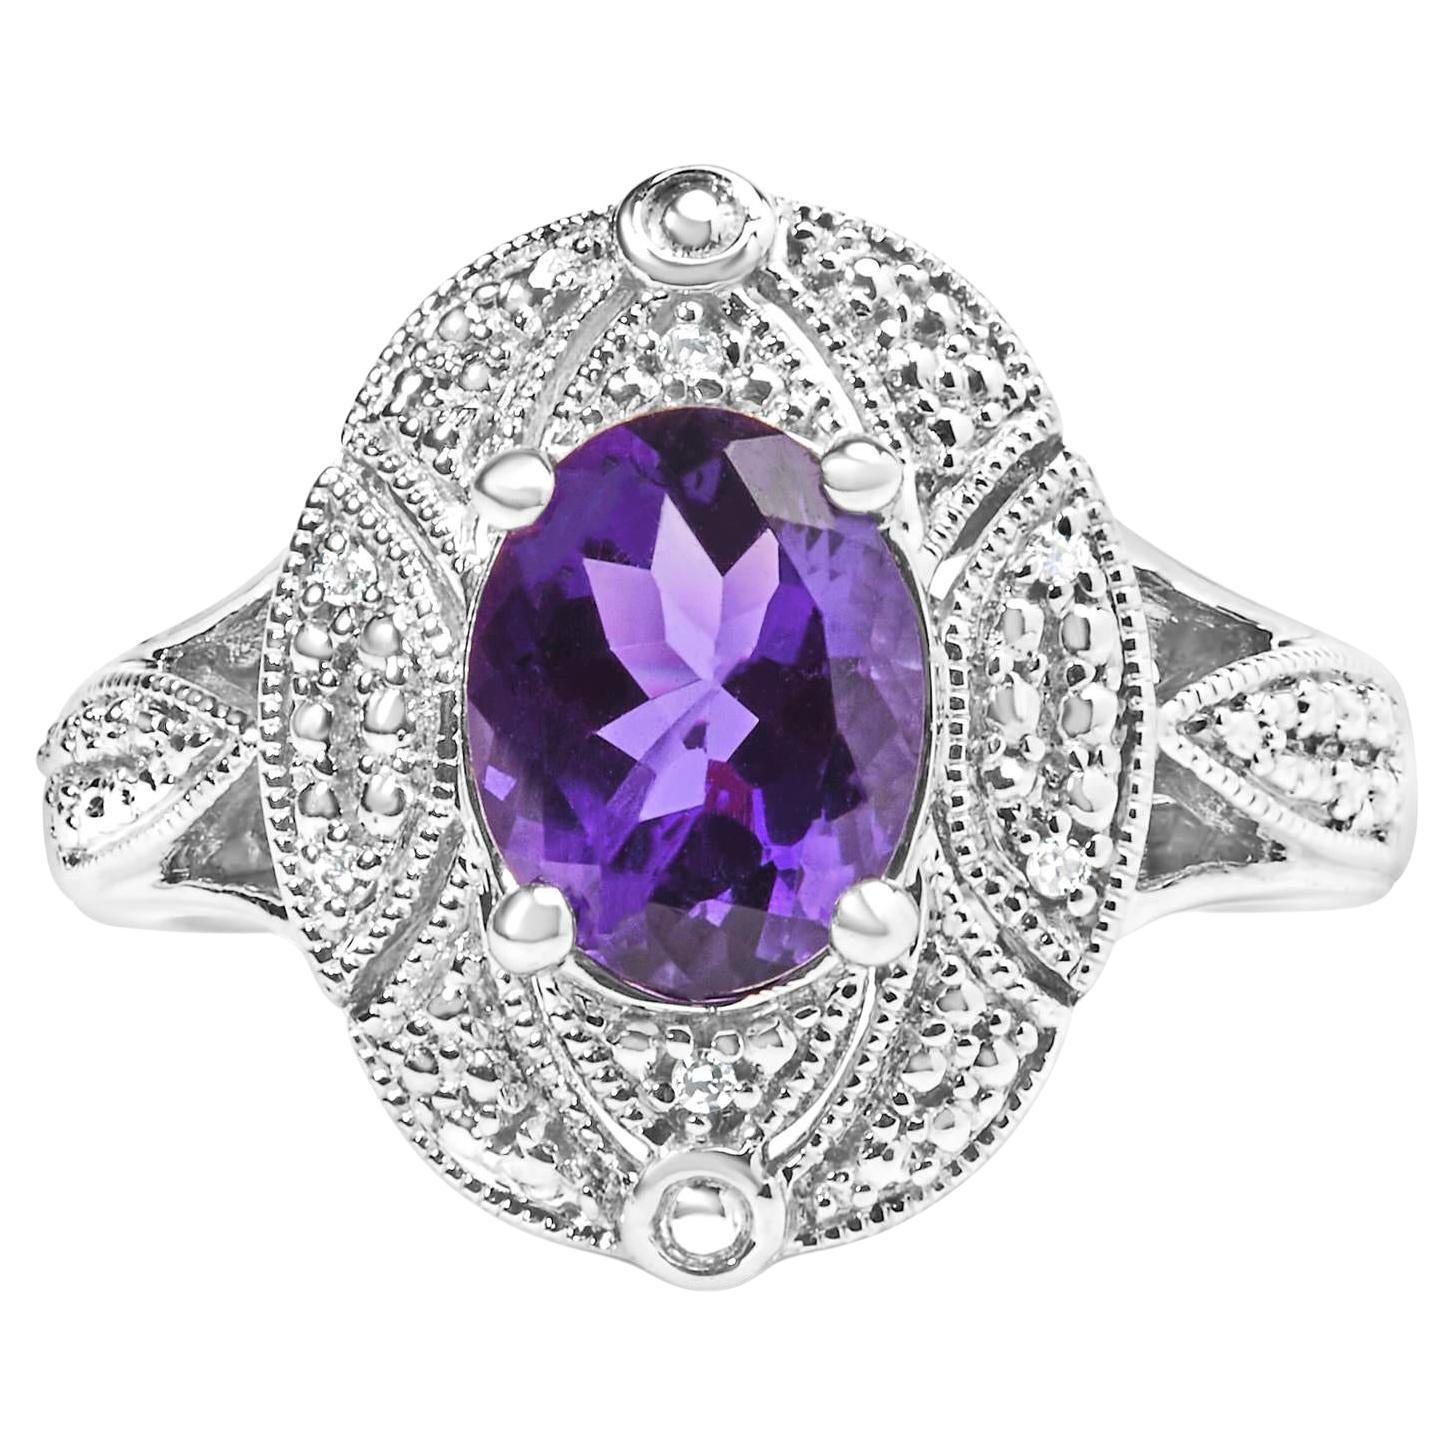 Amethyst Cocktail Ring Diamonds 1.78 Carats Sterling Silver